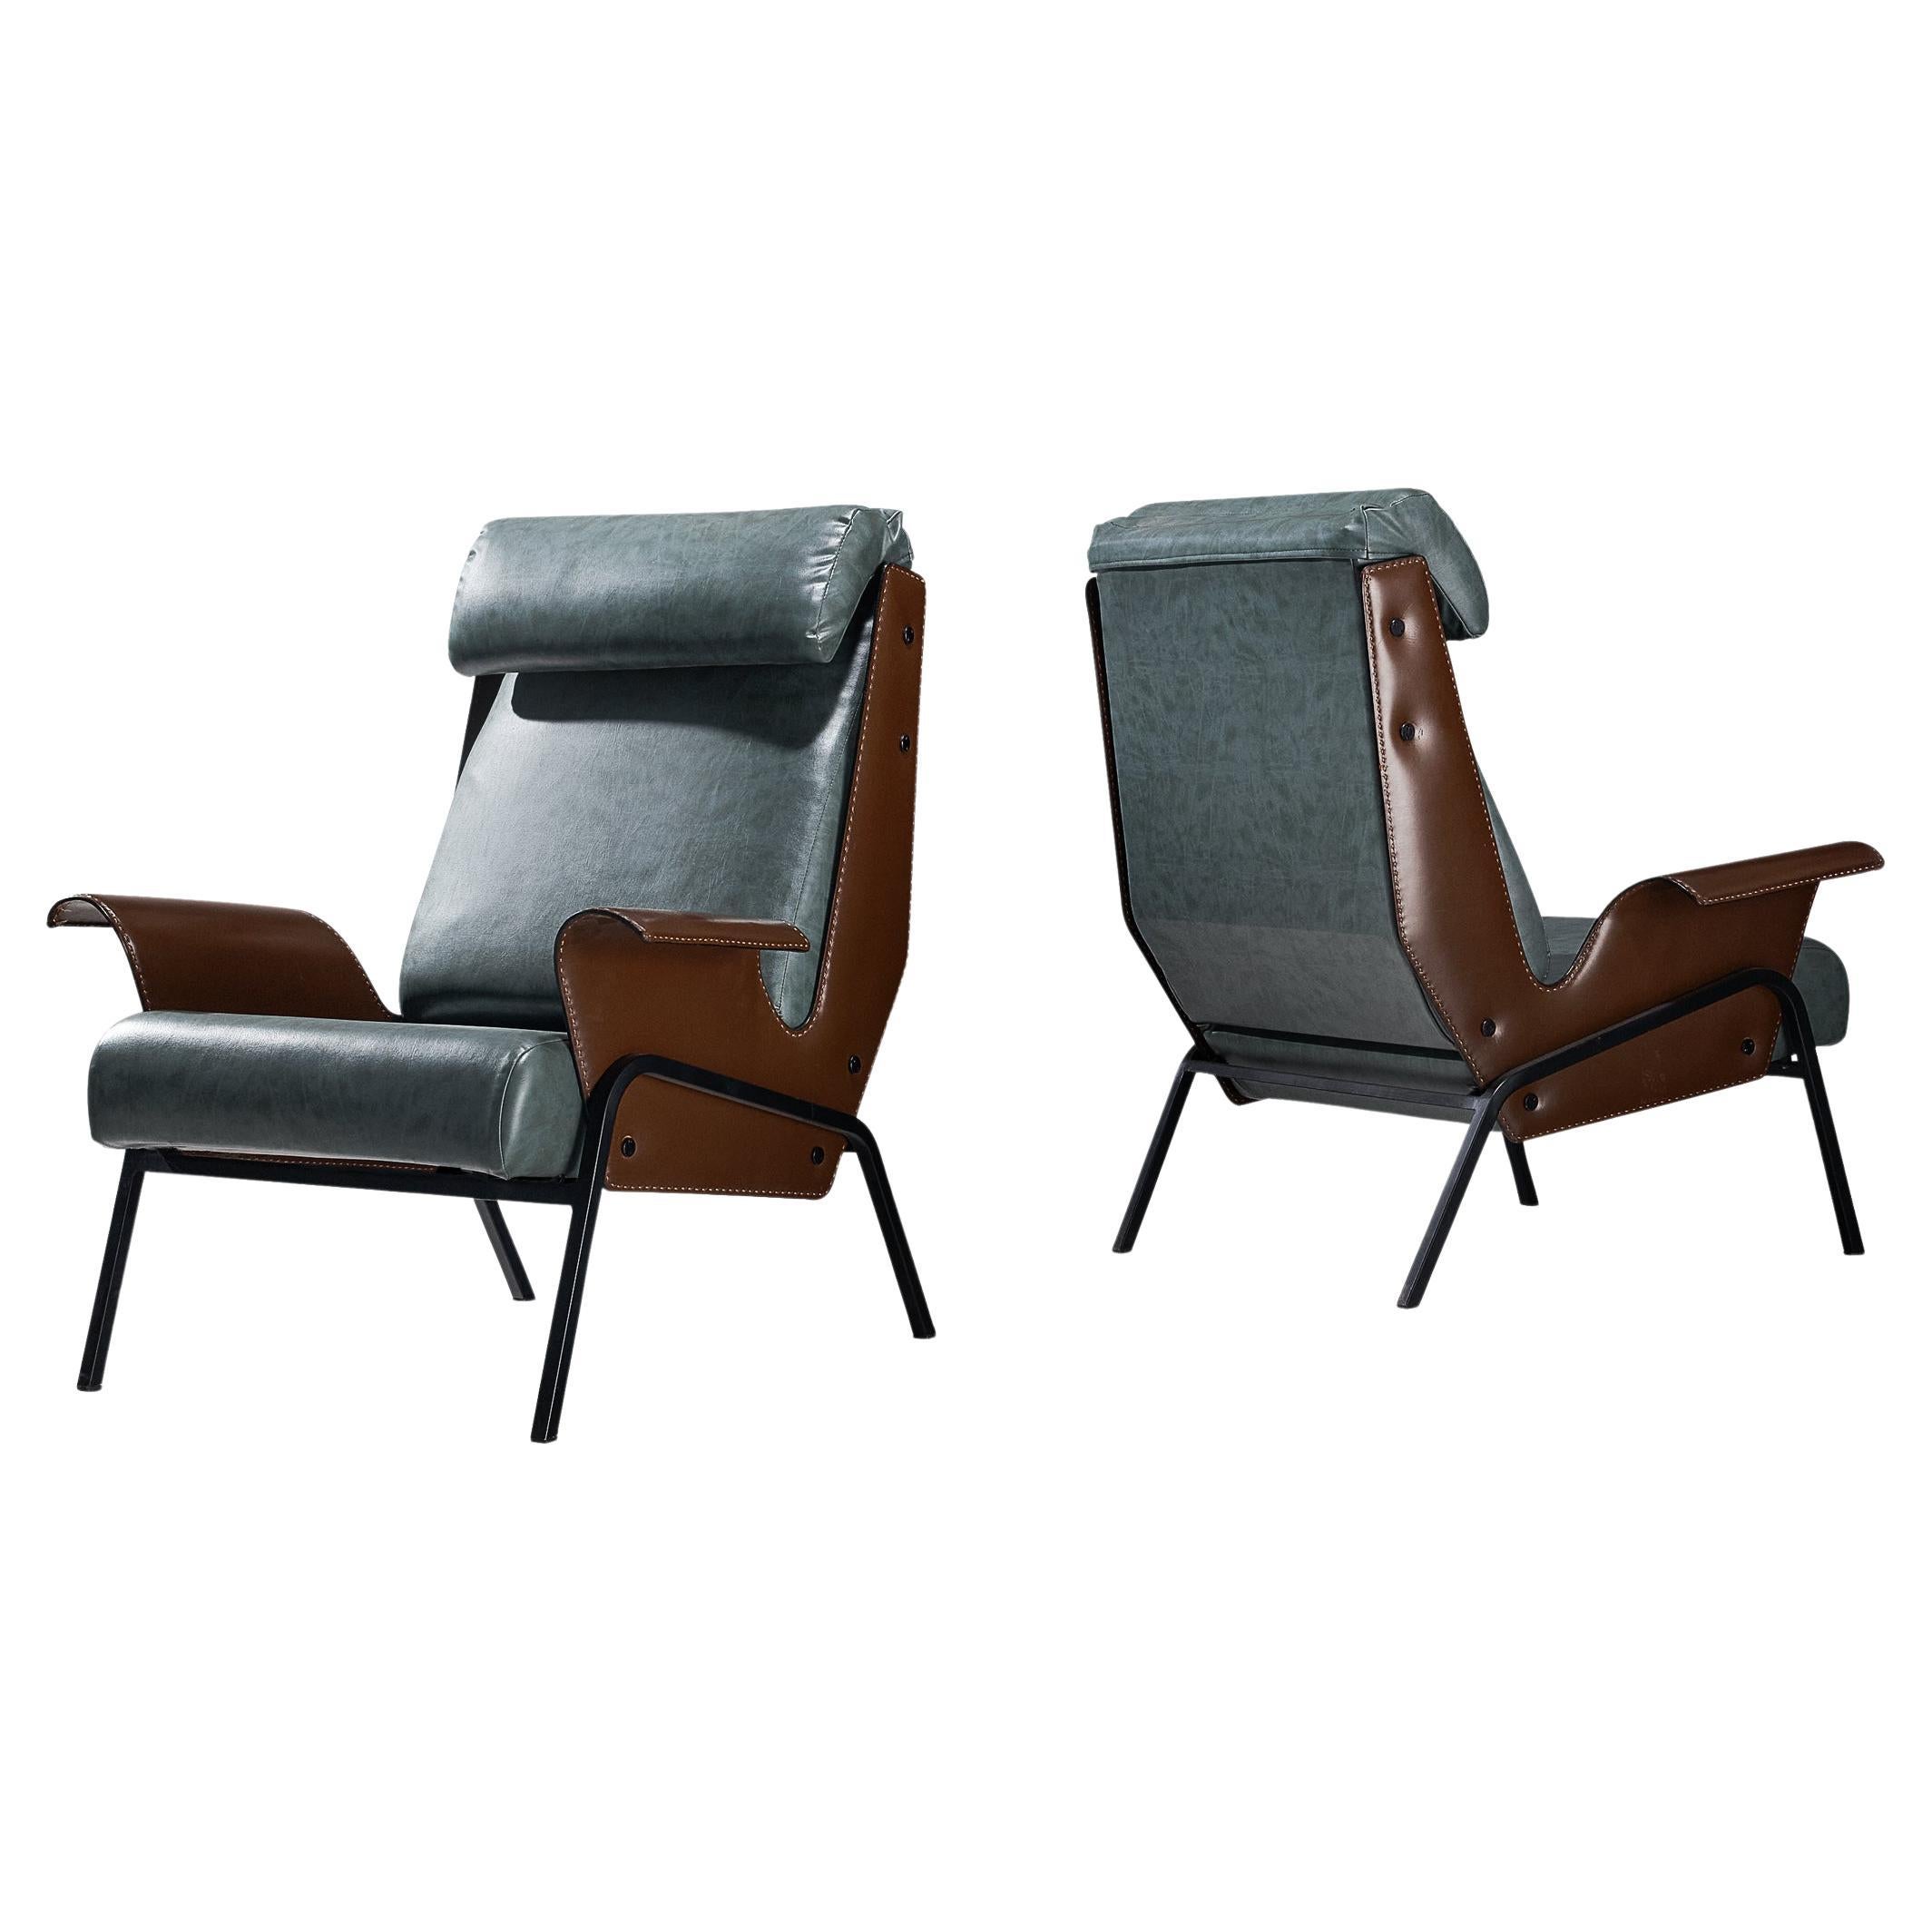 Gustavo Pulitzer for Arflex Pair of Lounge Chairs 'Alba' in Leather